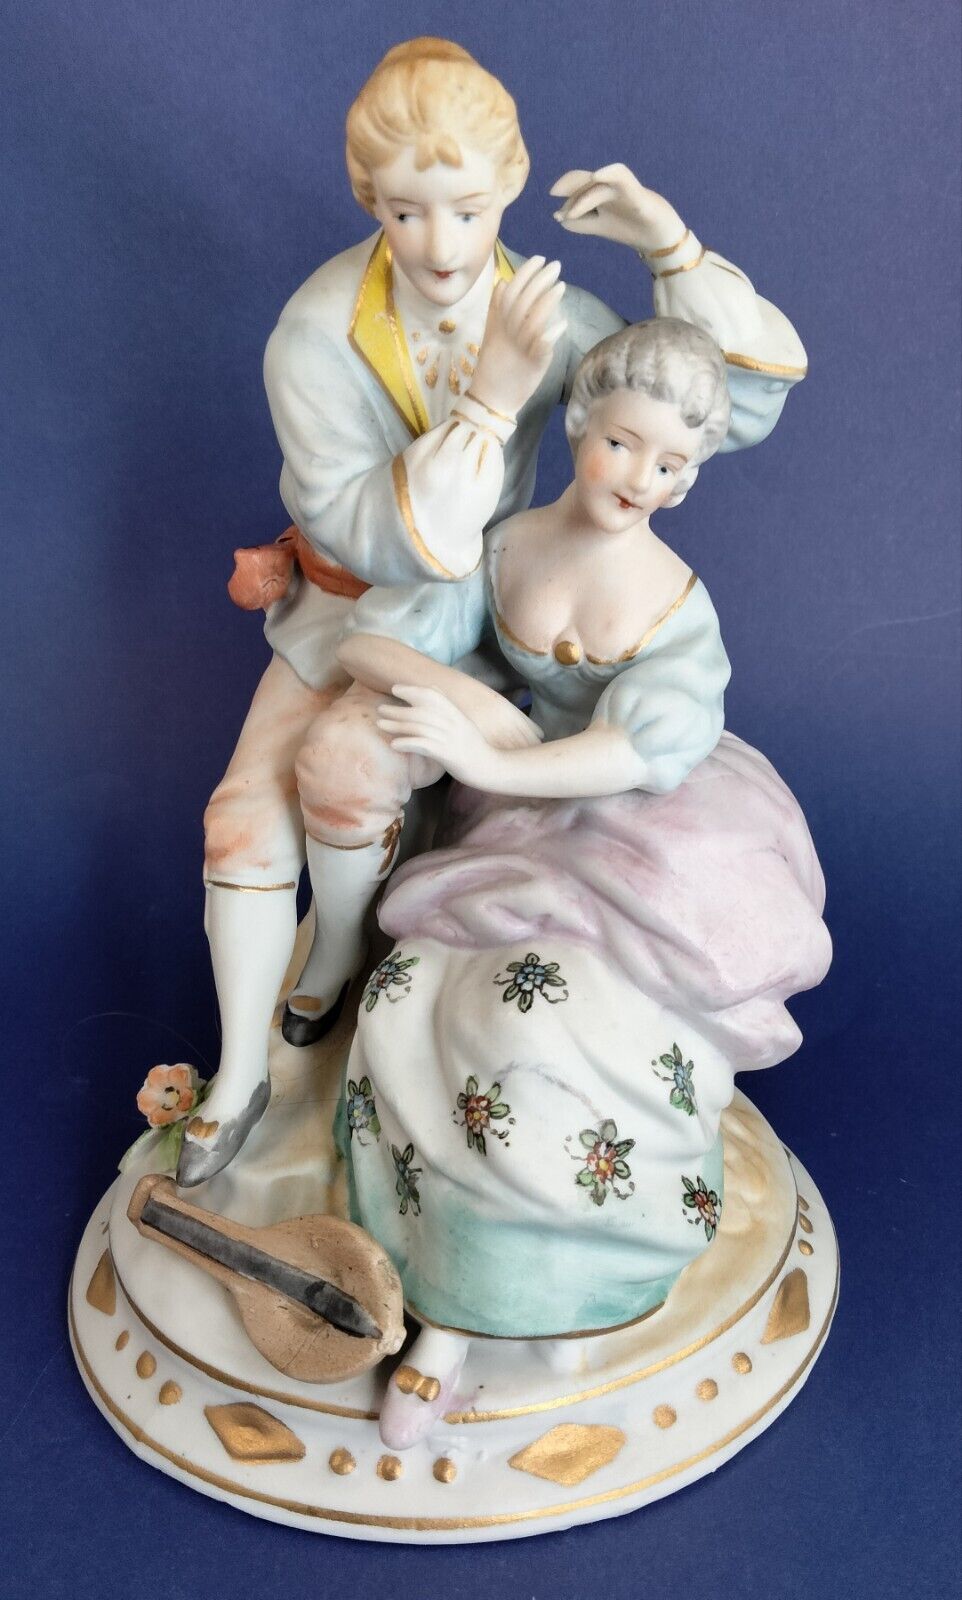 Vintage Occupied Japan Bisque French or Colonial Courting Couple Figurines